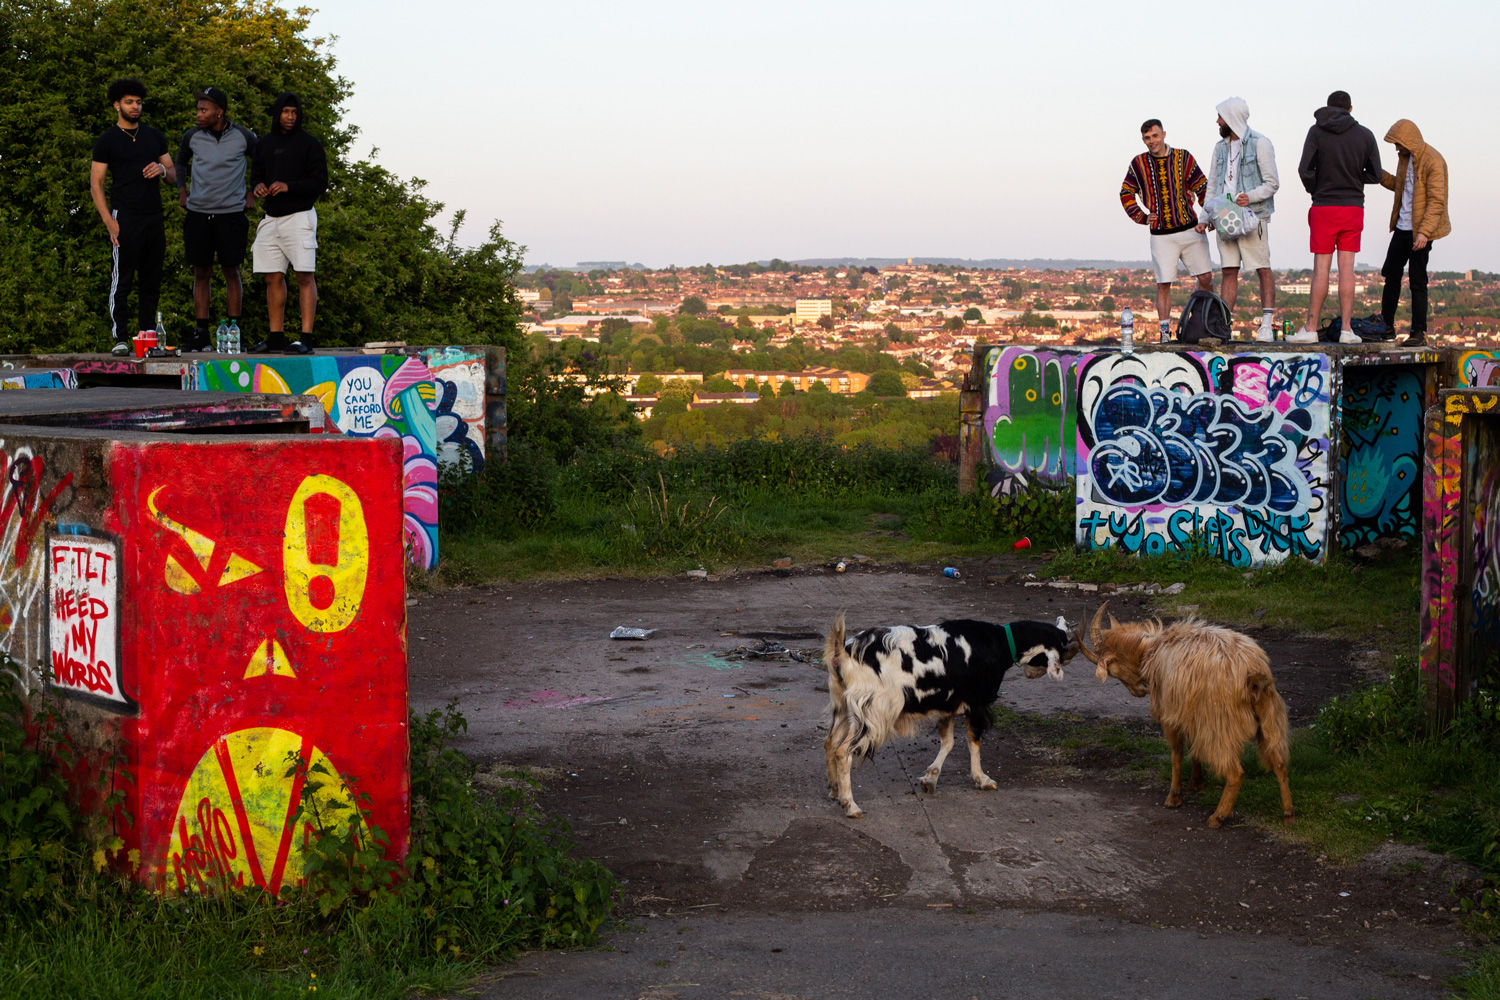 Young men standing on a graffitied structure with two goats in the foreground and rooftops of a residential area in the background.